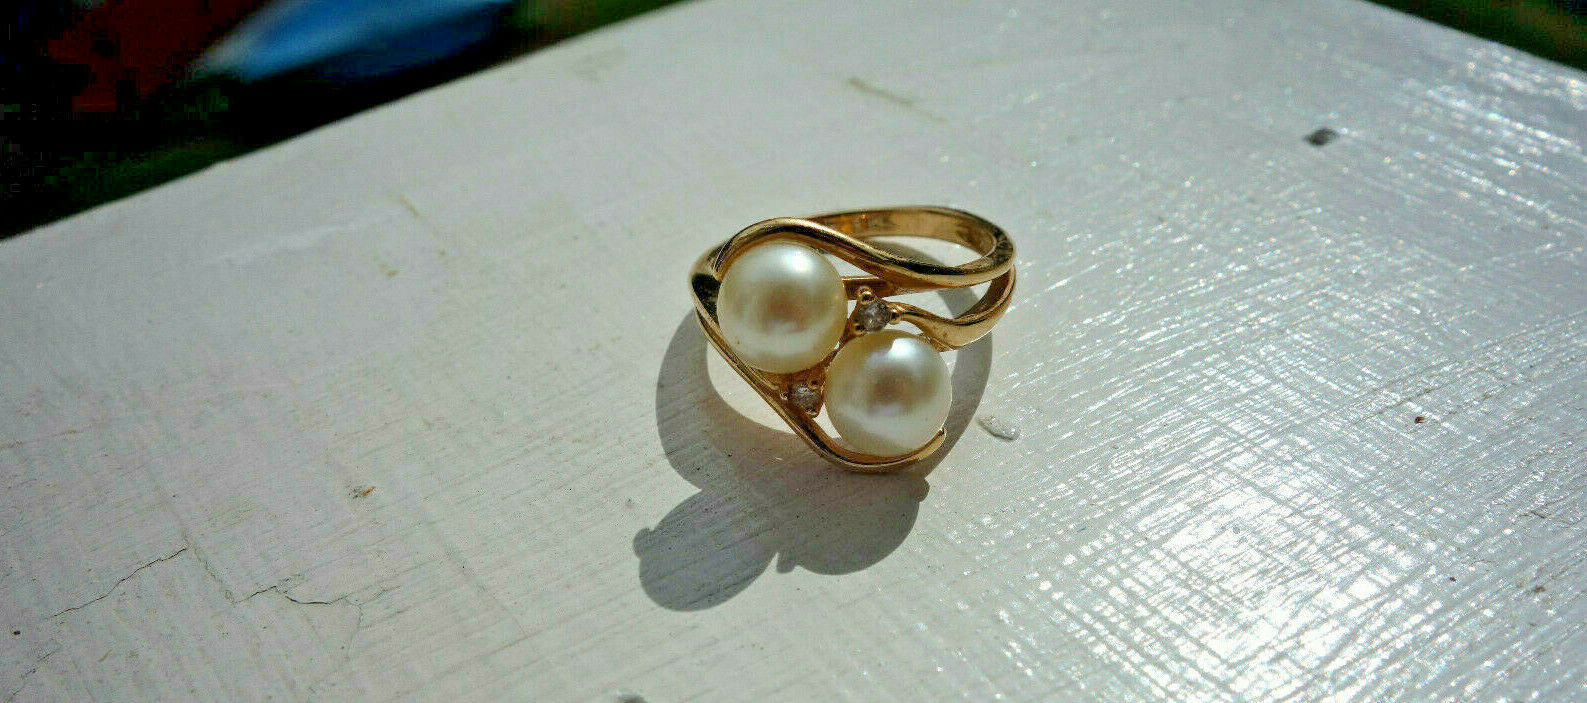 14k White Gold And 2 Pearl Ring With Diamond Accents Size 7 Stamped P14k C (ah)